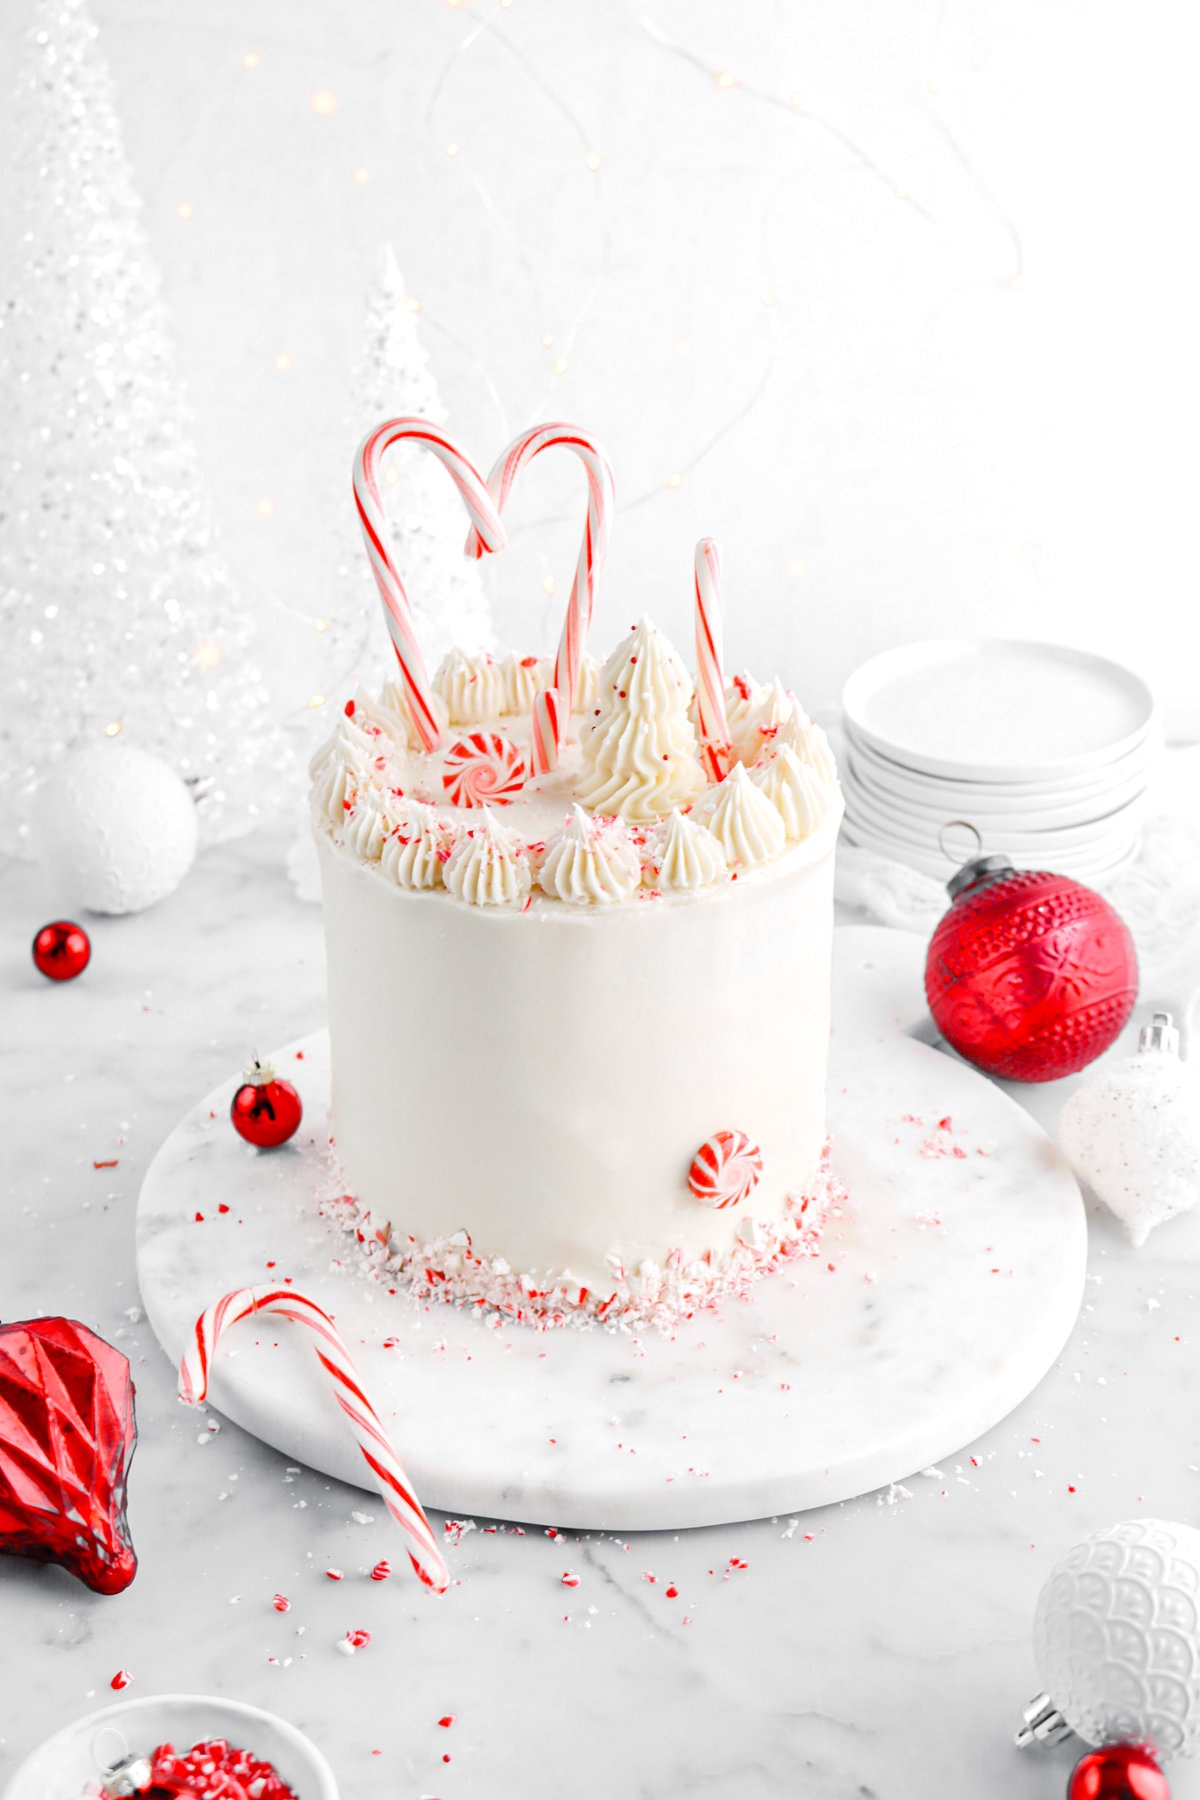 pulled back angled image of layer cake on marble surface with red and white ornaments around and crushed peppermint.